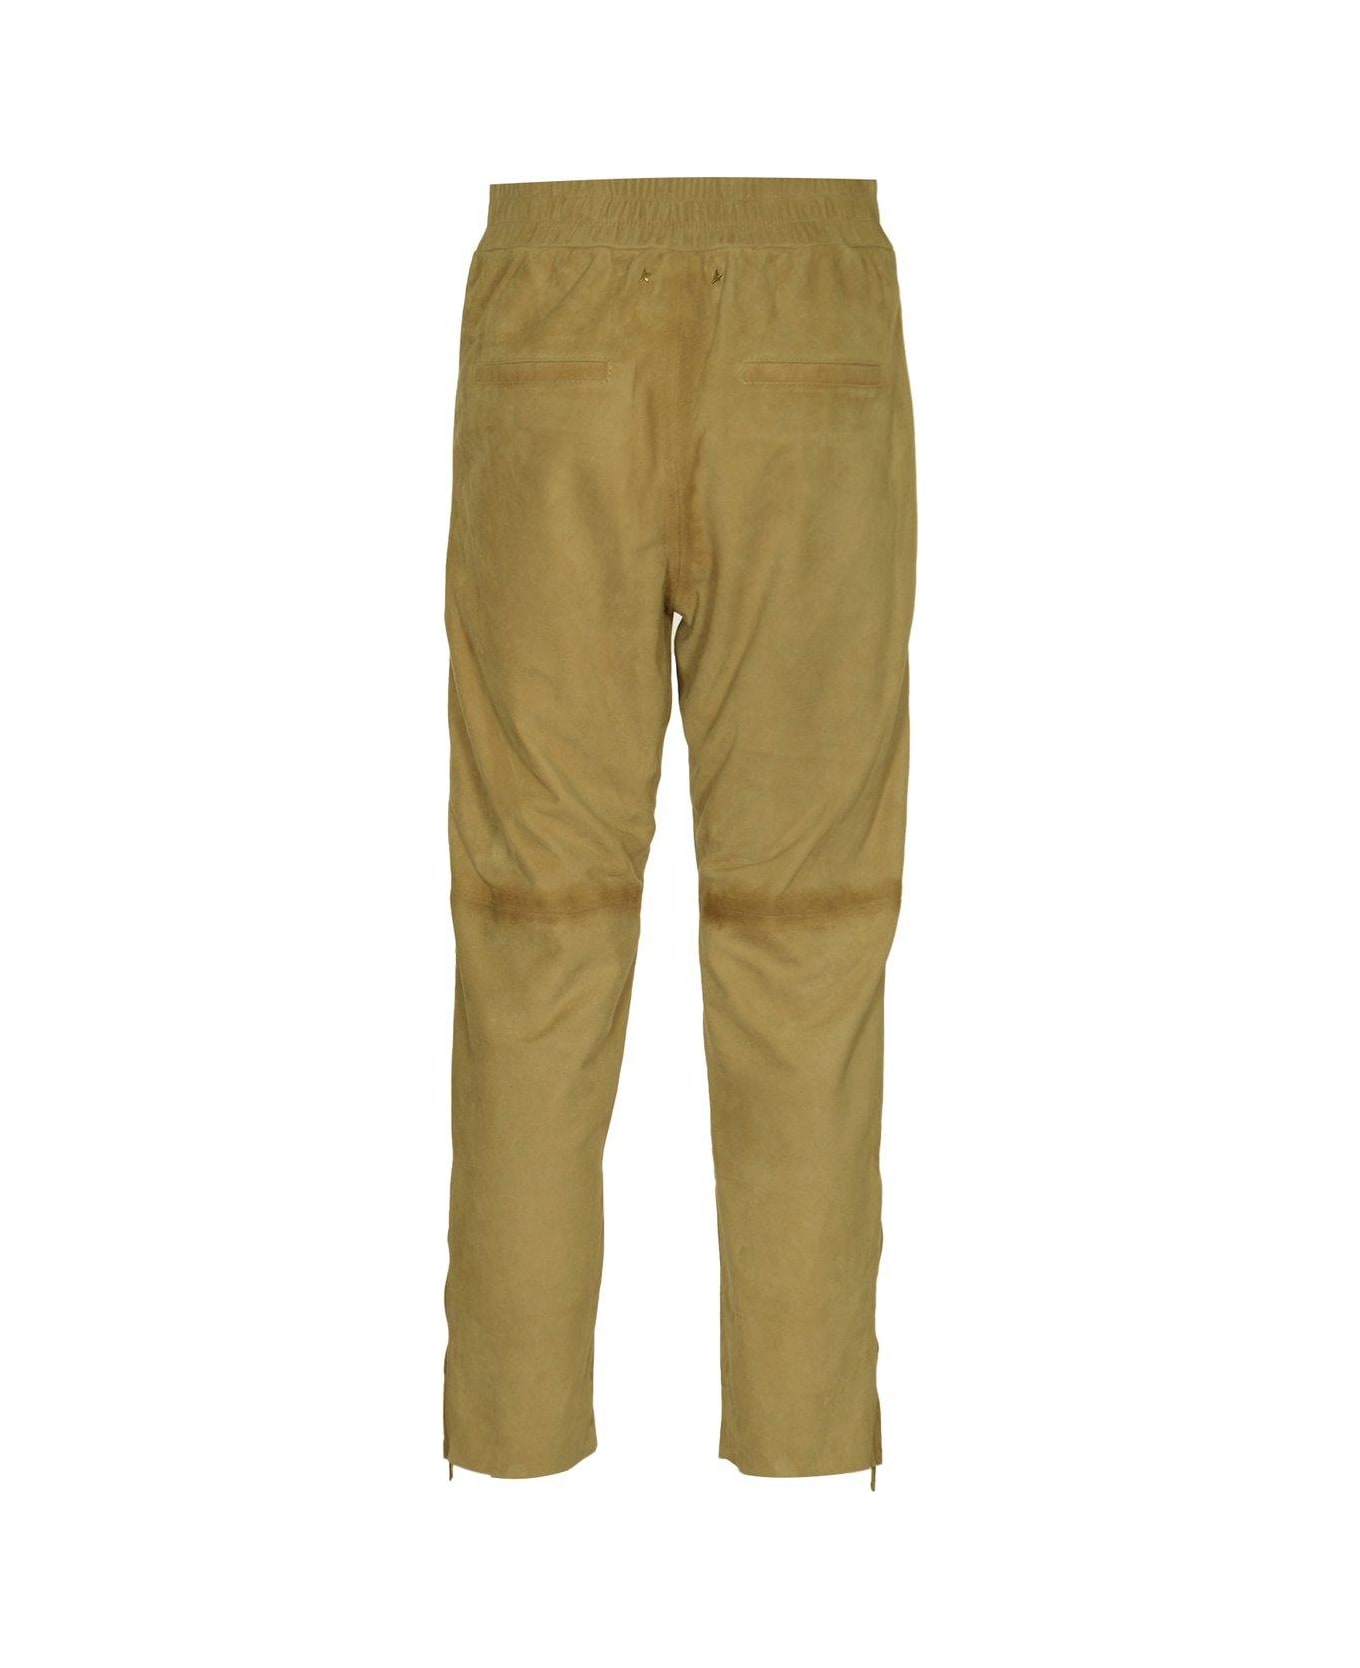 Golden Goose Zipped Detailed Trousers - Dark Taupe ボトムス